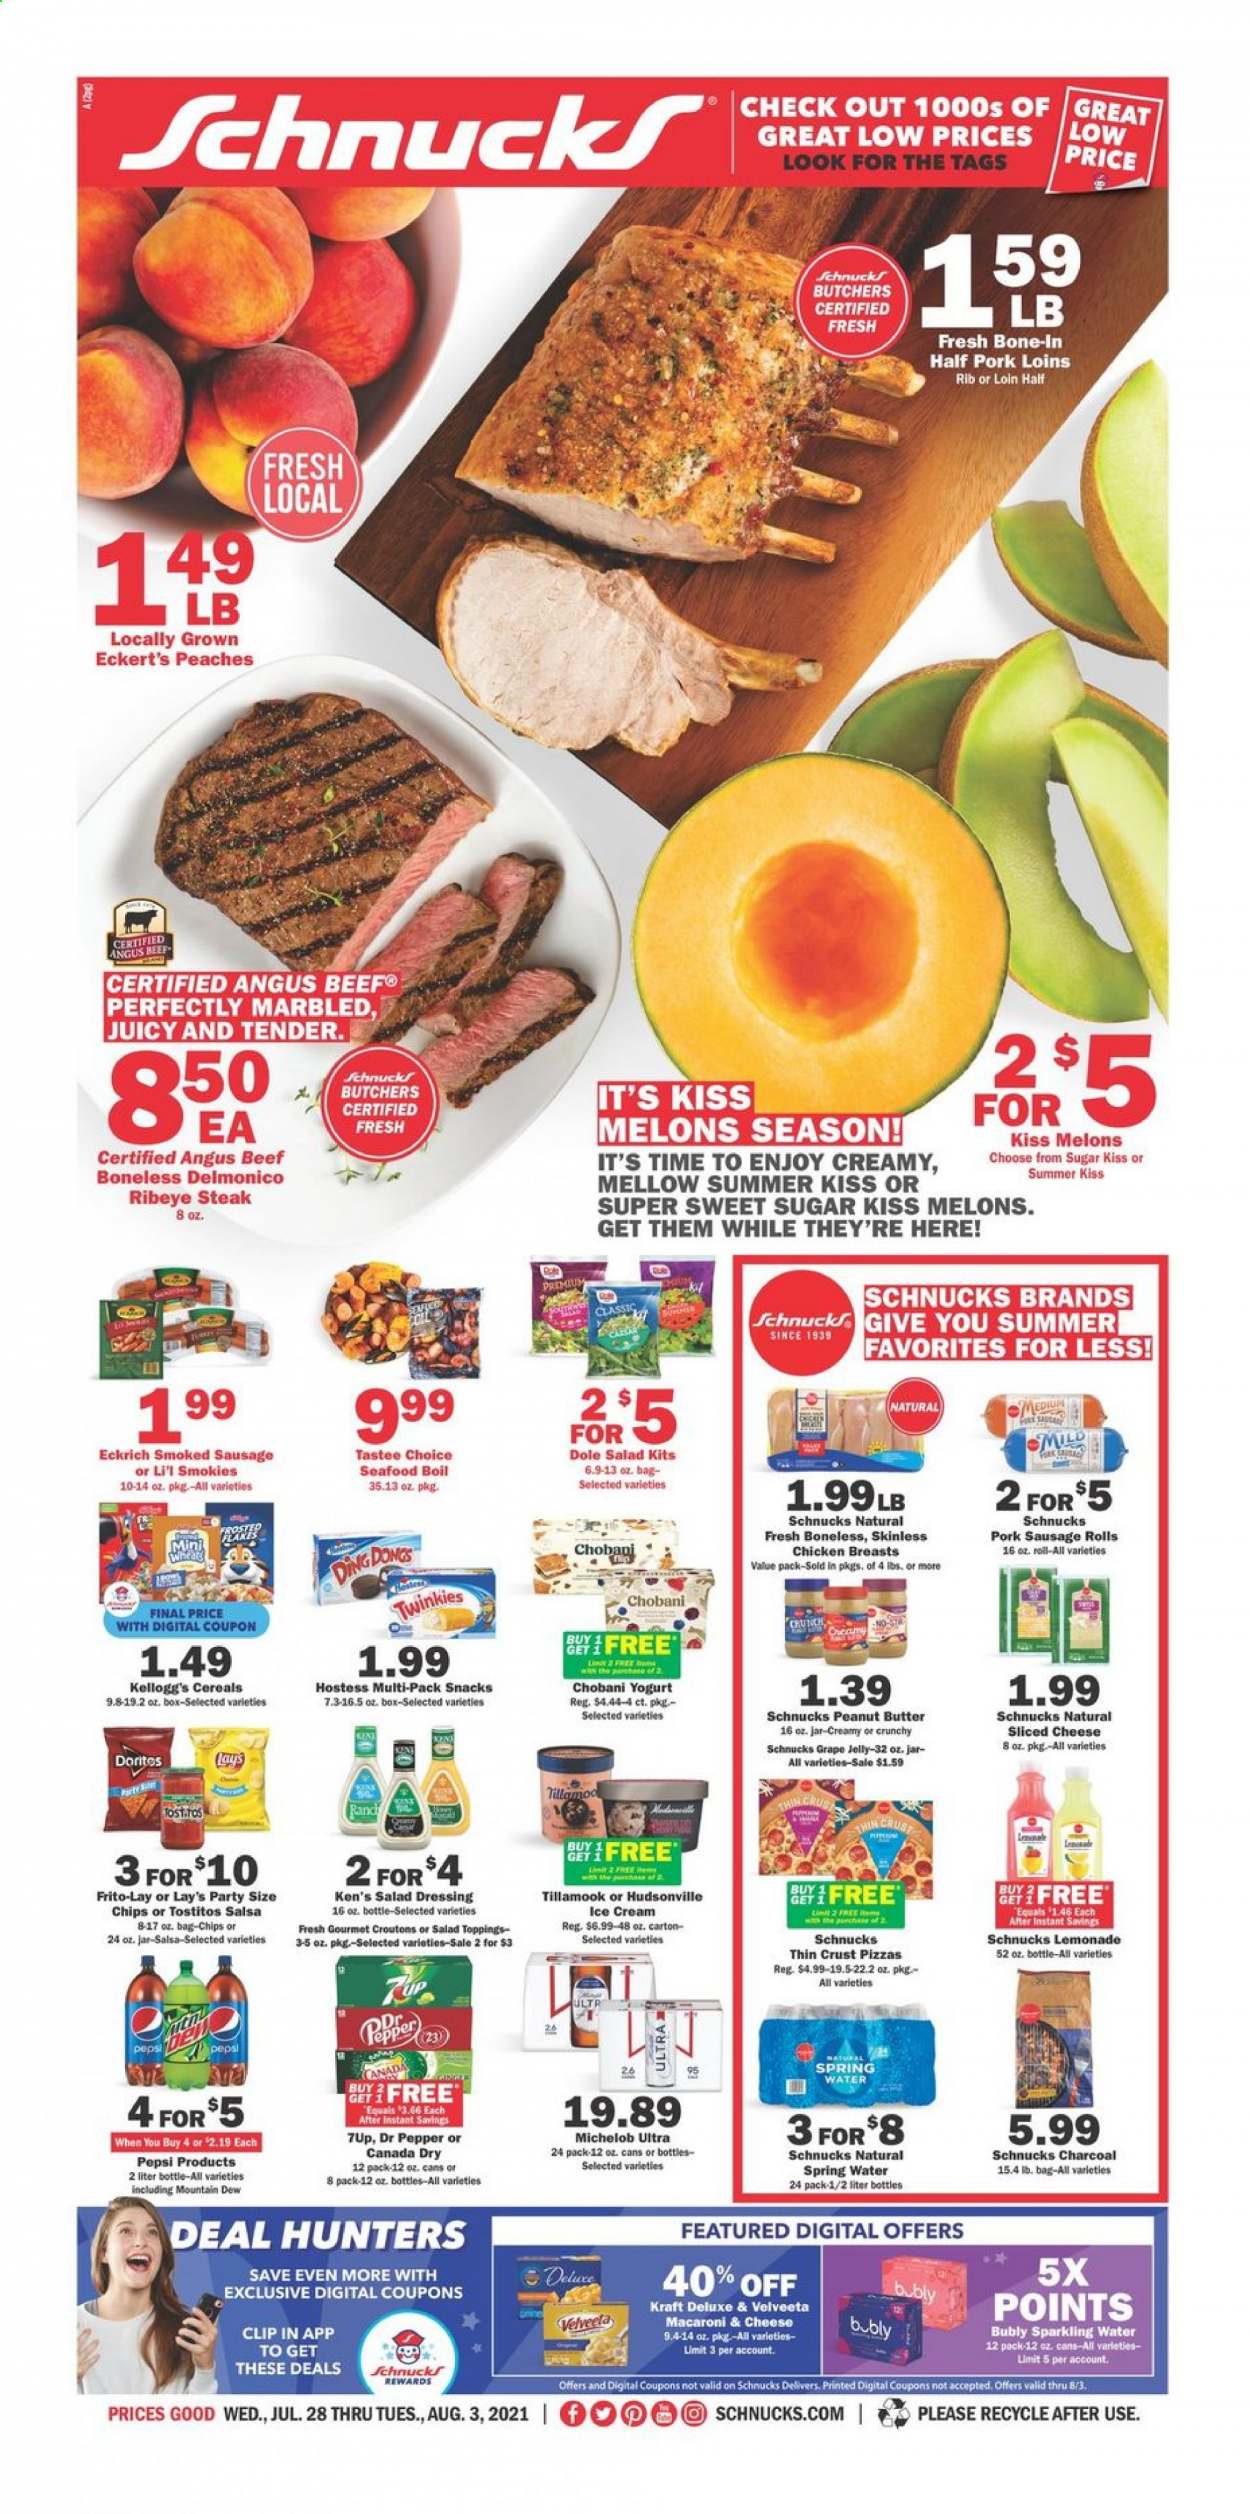 thumbnail - Schnucks Flyer - 07/28/2021 - 08/03/2021 - Sales products - Michelob, sausage rolls, Dole, seafood, seafood boil, macaroni & cheese, pizza, Kraft®, sausage, smoked sausage, pork sausage, sliced cheese, yoghurt, Chobani, ice cream, snack, jelly, Kellogg's, Doritos, chips, Lay’s, Frito-Lay, Tostitos, croutons, sugar, cereals, Frosted Flakes, salad dressing, dressing, salsa, grape jelly, peanut butter, Canada Dry, lemonade, Mountain Dew, Pepsi, Dr. Pepper, 7UP, spring water, sparkling water, beer, chicken breasts, beef meat, beef steak, steak, ribeye steak, melons, peaches. Page 1.